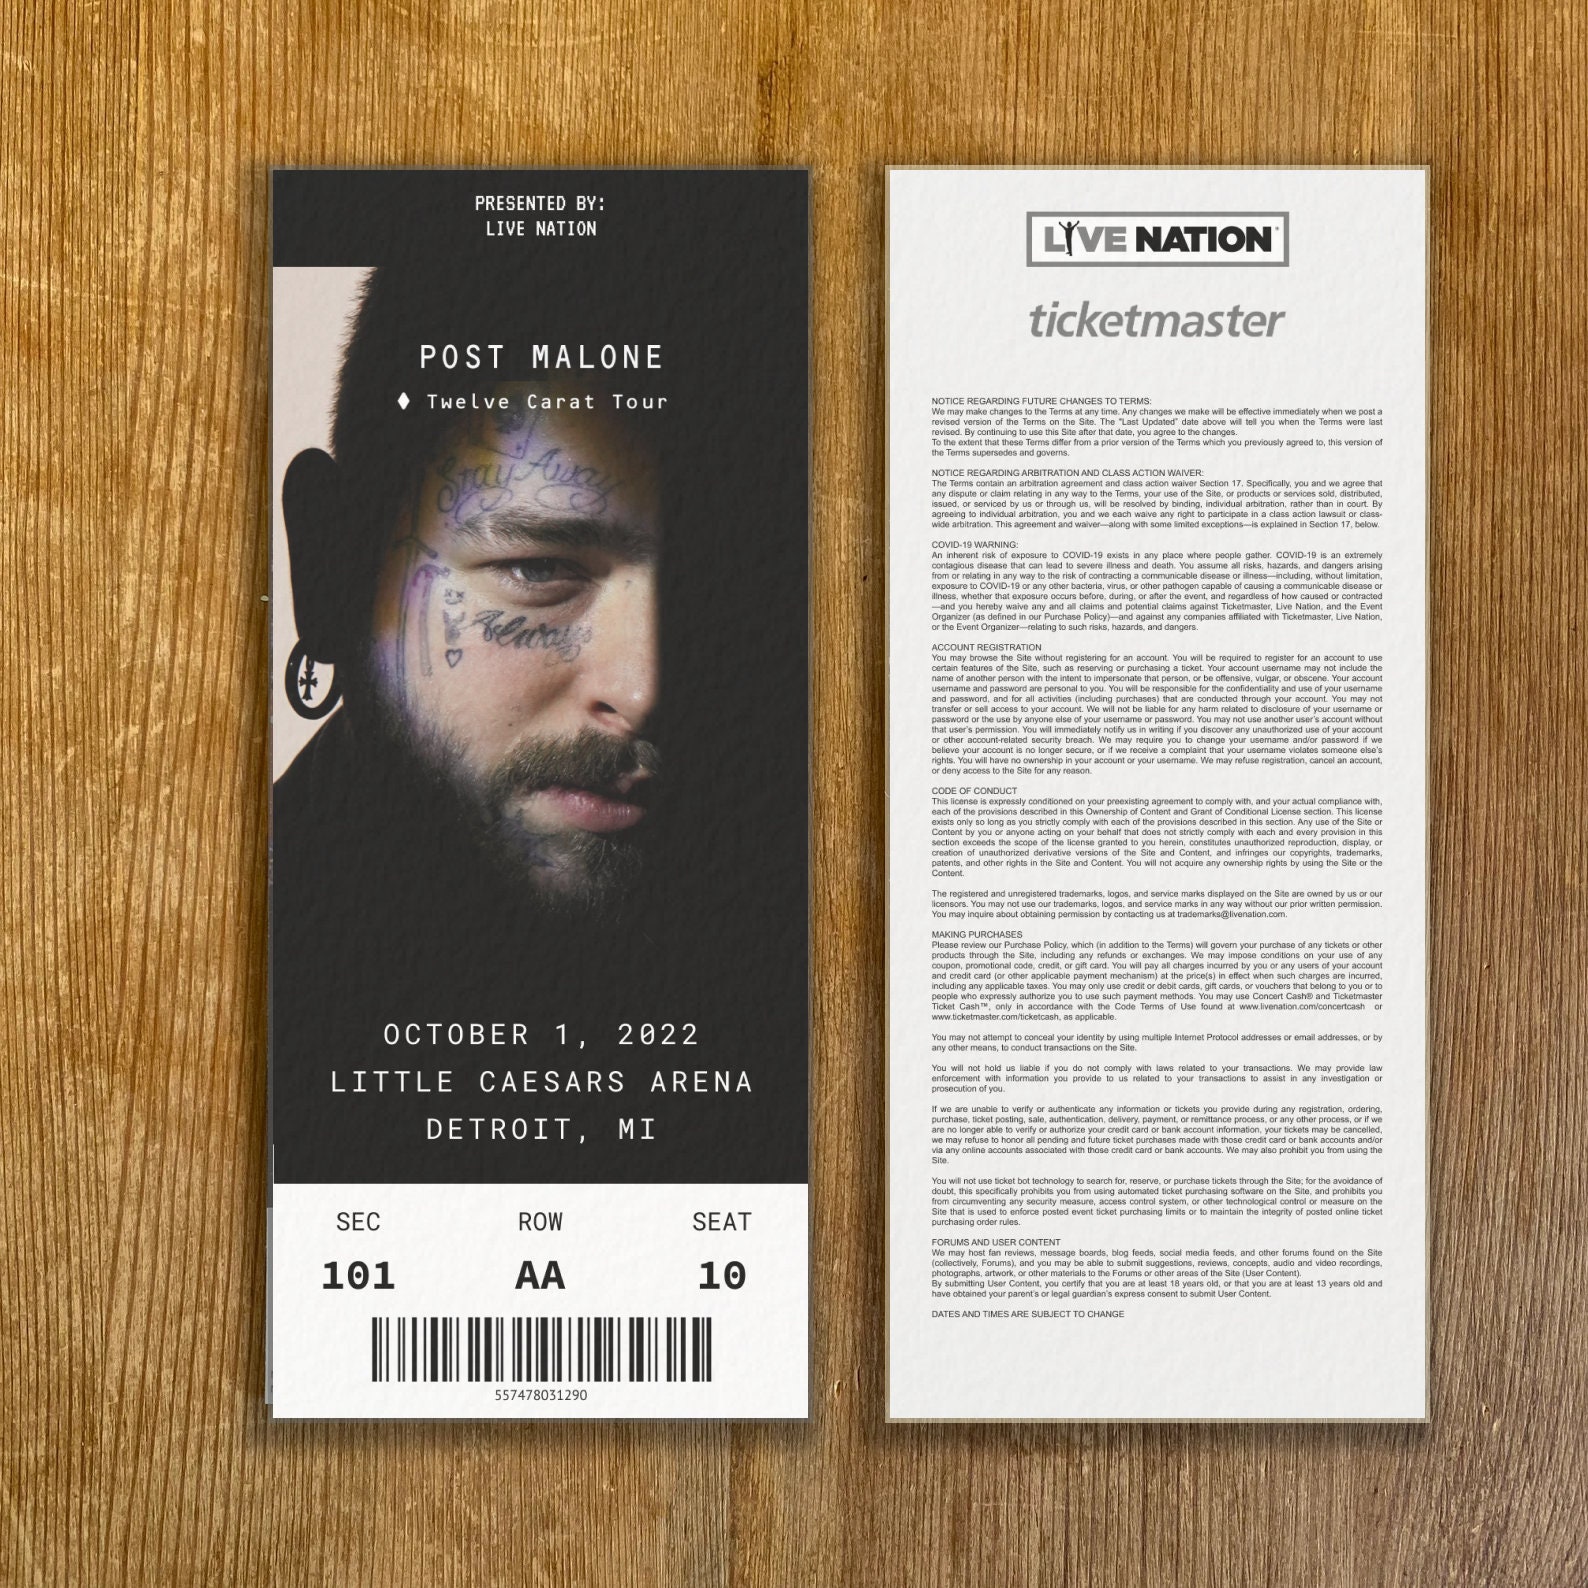 Post Malone Concert Live Stream, Date, Location and Tickets info